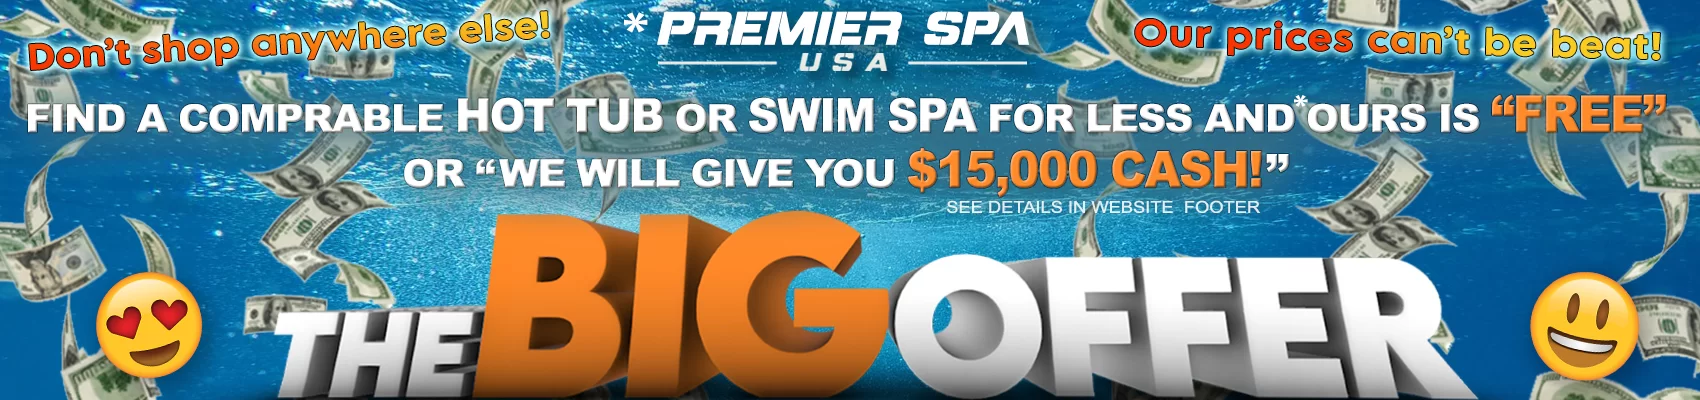 Premier Outdoor USA The Big Offer Banner2USE copy